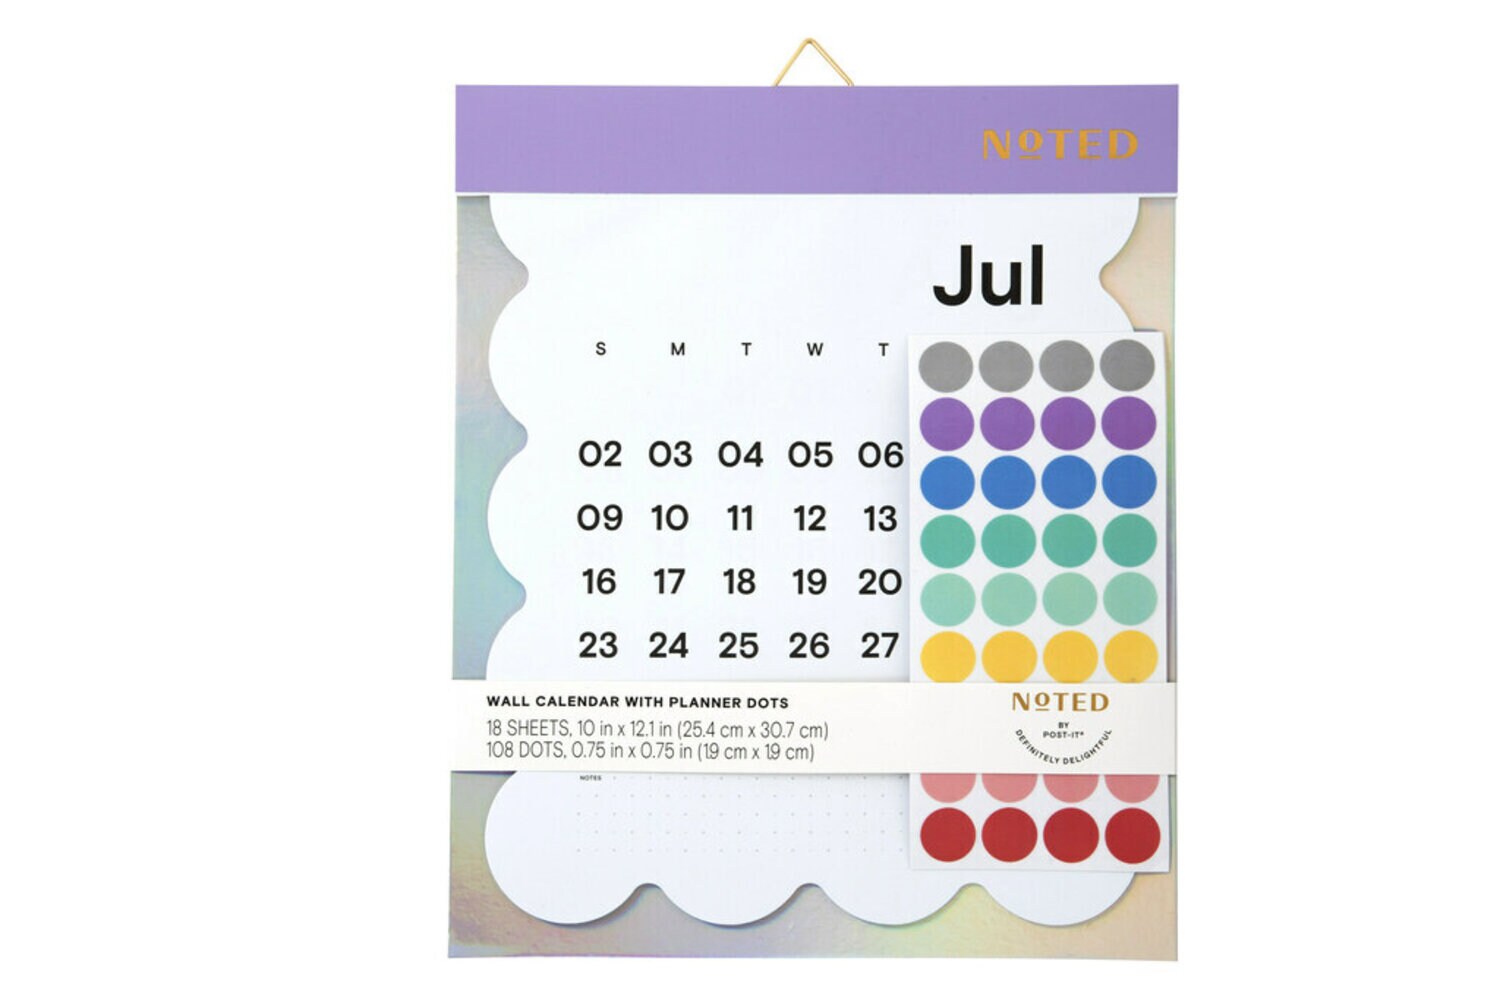 7100289222 - Post-it Wall Calendar with Planner Dots NTD7-CAL-1, 10 in x 12.5 in (25.4 cm x 31.75 cm)